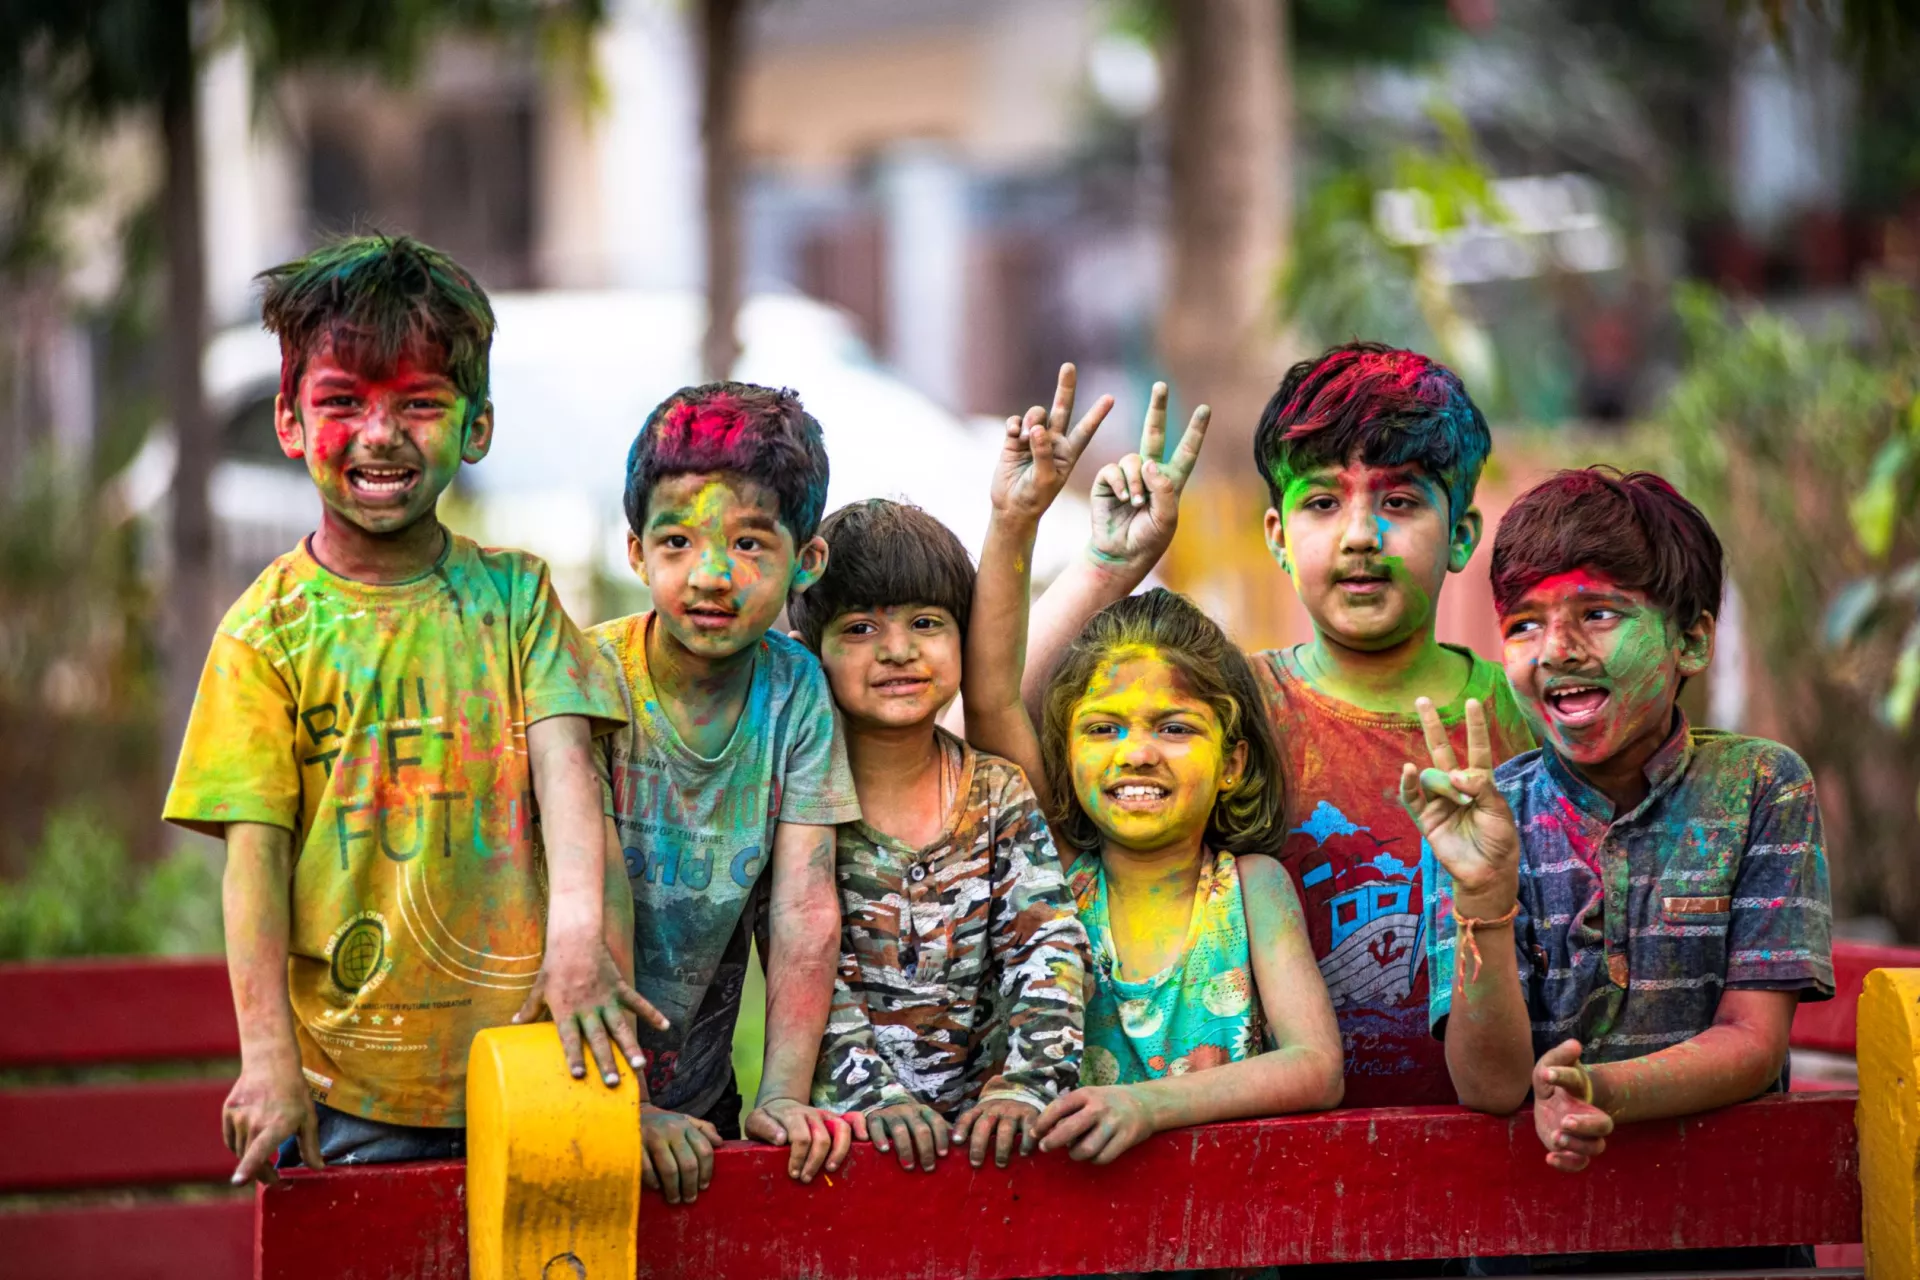 Kids playing with paint colours put all over their bodies and clothes